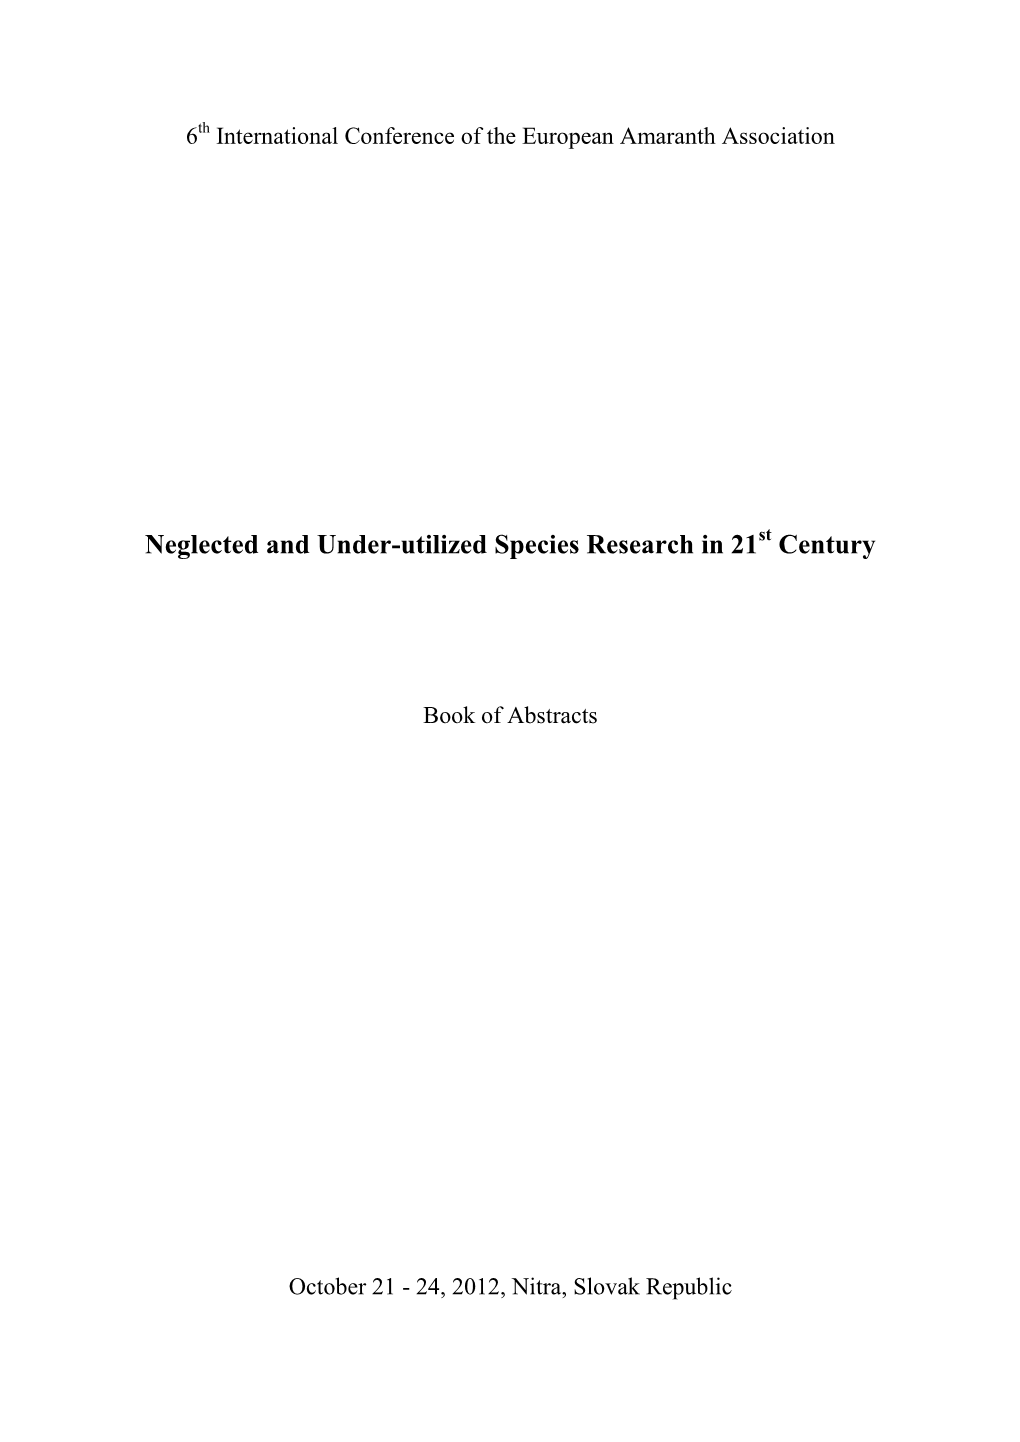 Neglected and Under-Utilized Species Research in 21 Century